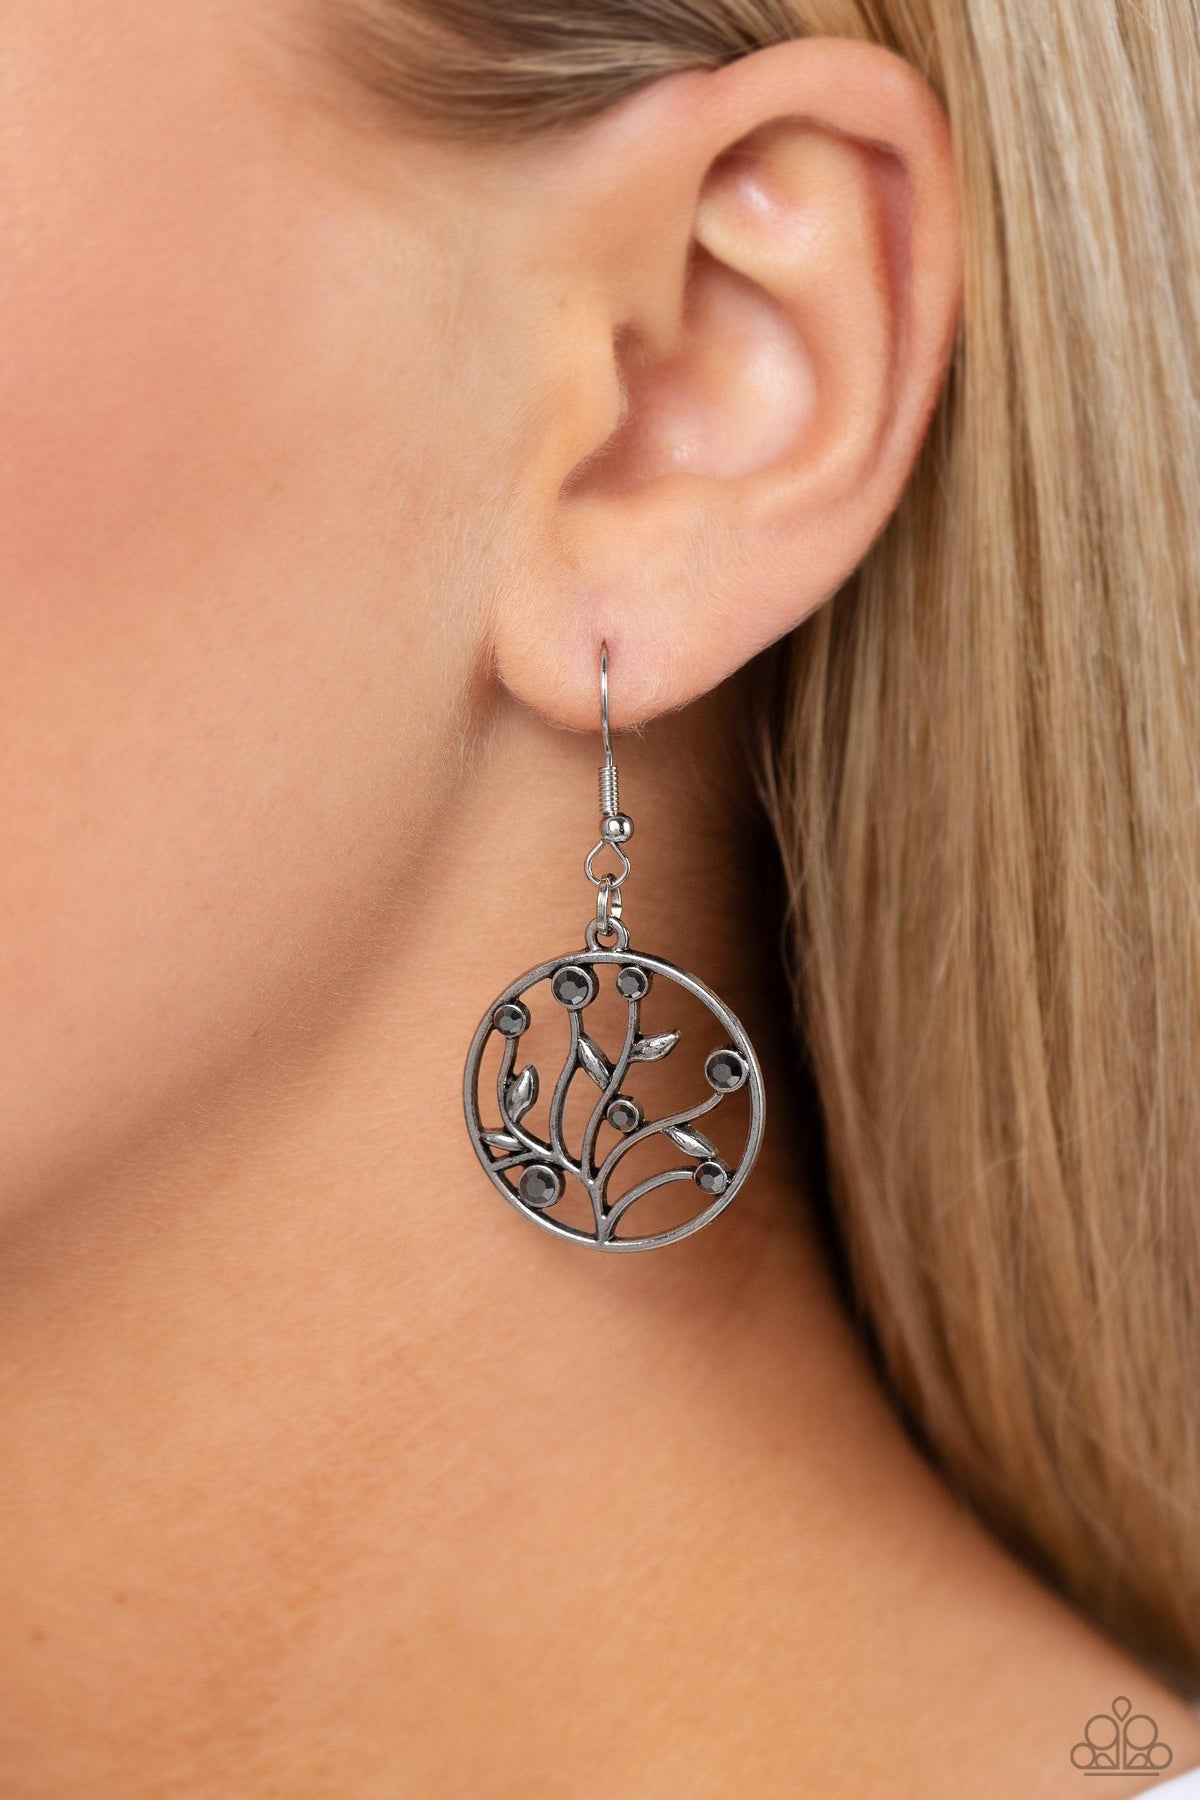 Bedazzlingly Branching Silver Earrings - Paparazzi Accessories-on model - CarasShop.com - $5 Jewelry by Cara Jewels